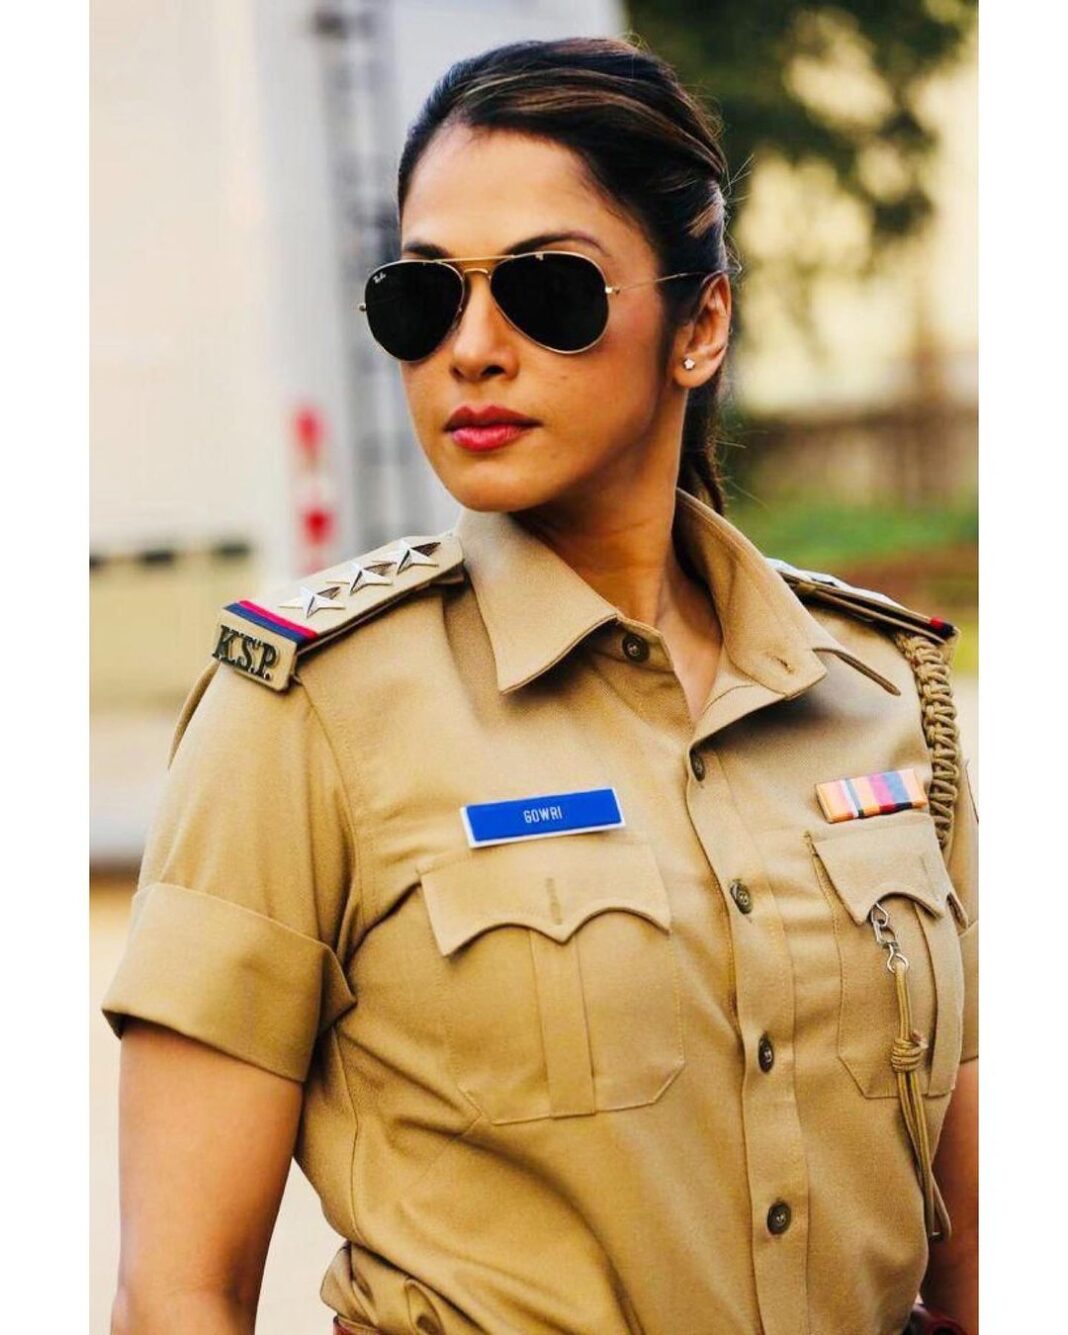 Isha Koppikar Instagram - I’m often asked how does it feel to play a cop on screen, and I say - if I wasn’t an actor, I’d be a police officer. For me it’s not just a character, it’s an extension of my personality, it’s a passion. #ishakoppikarnarang #ishakoppikar #policeofficer #police #policegirl #policewoman #actorslife #inspector #character